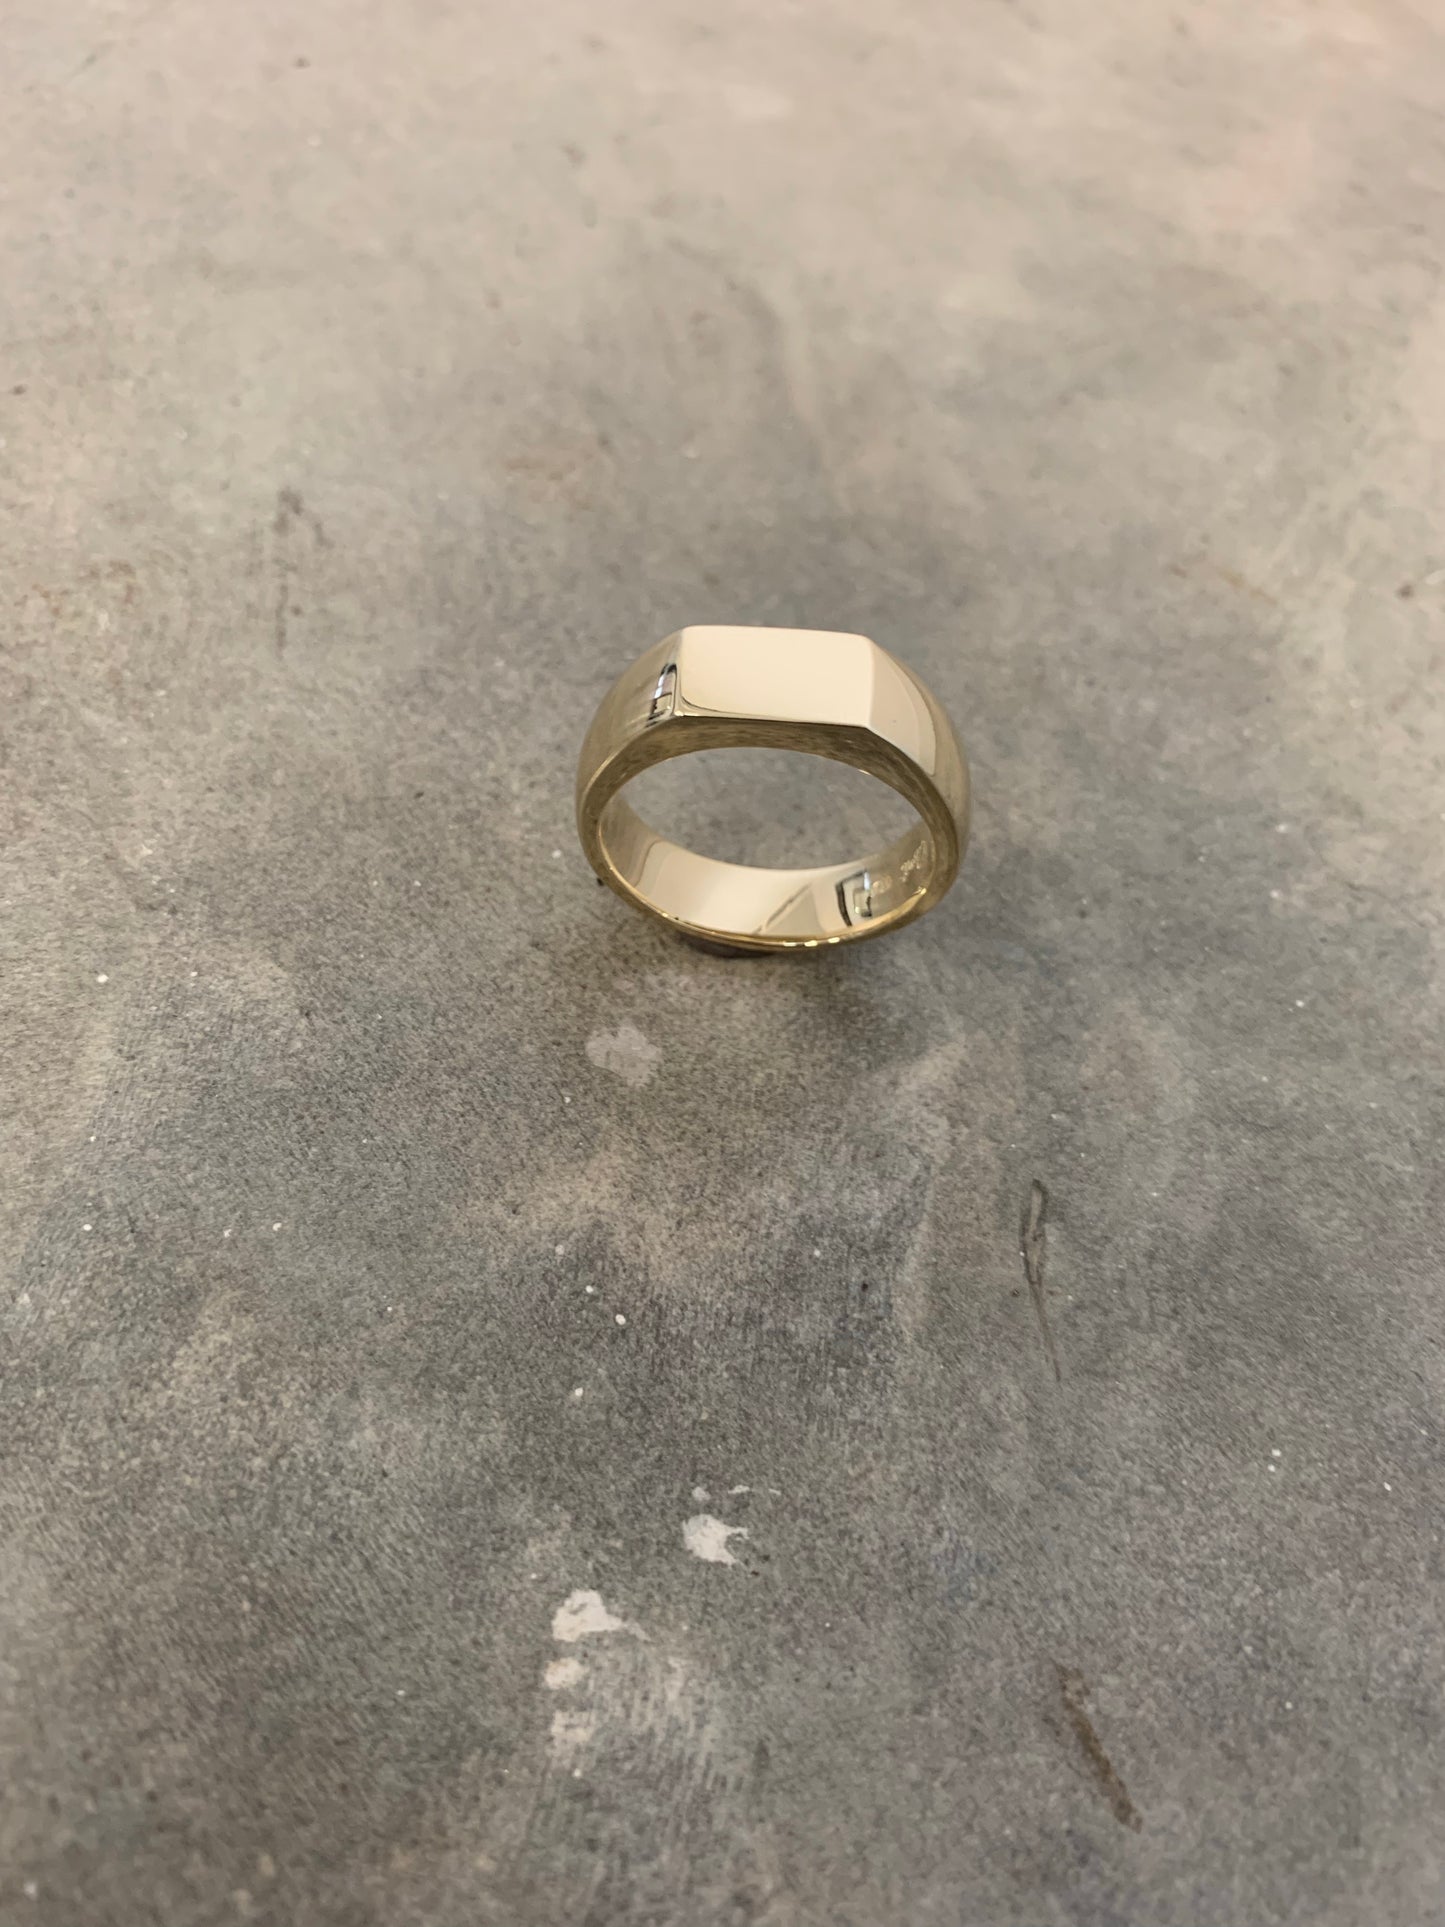 Gold Old Fashioned Ring